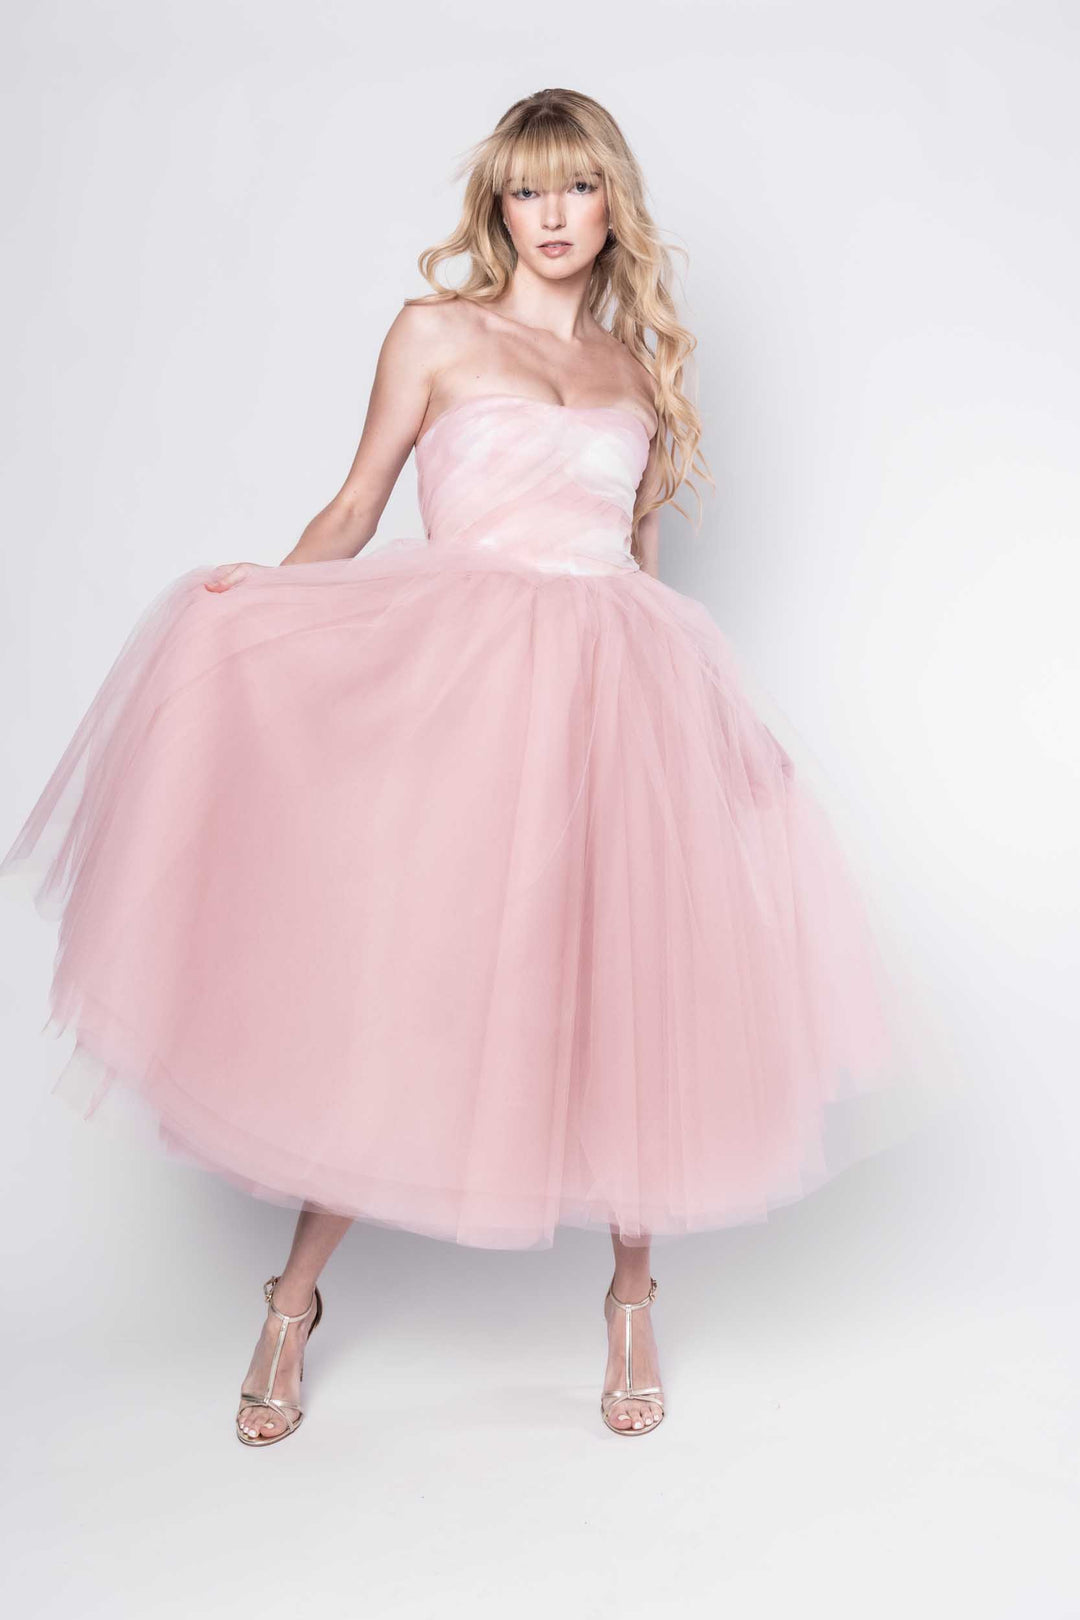 Beautiful model in a pink tulle Sujata Gazder tea-length dress - front view movement